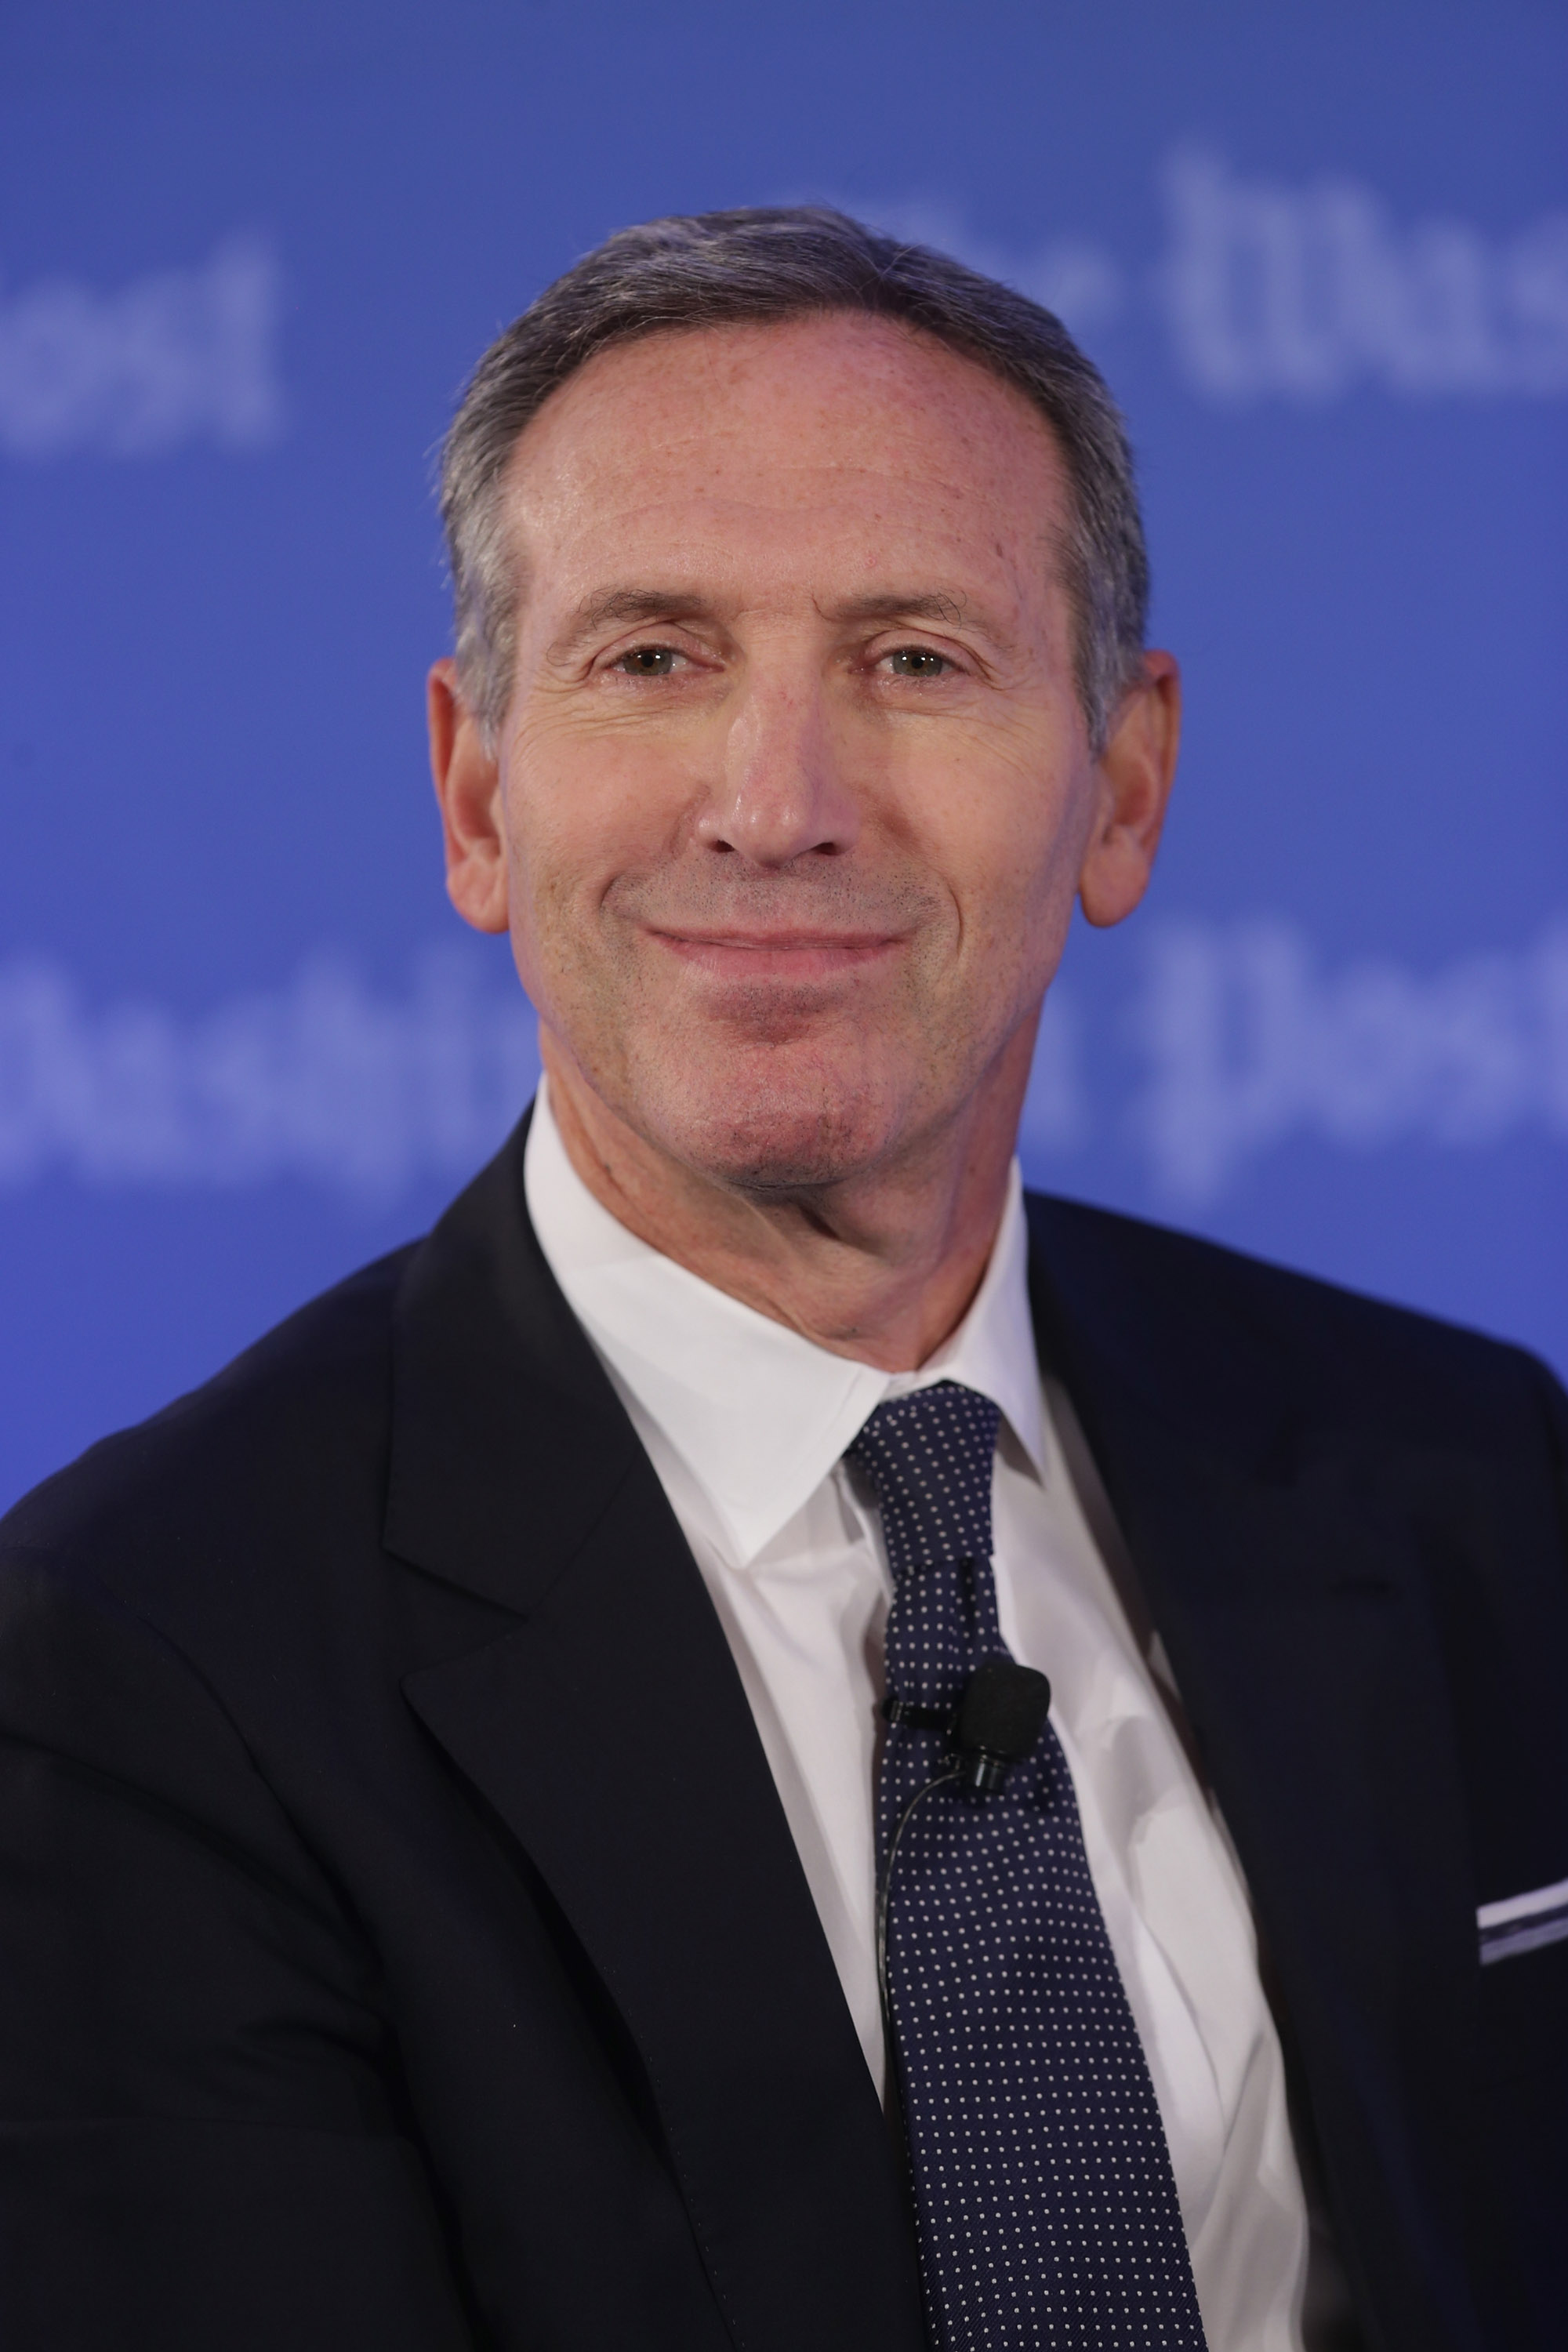 Howard Schultz participates in a forum titled 'Leading the Way' at the Washington Post in Washington, D.C. on Nov. 10, 2014.